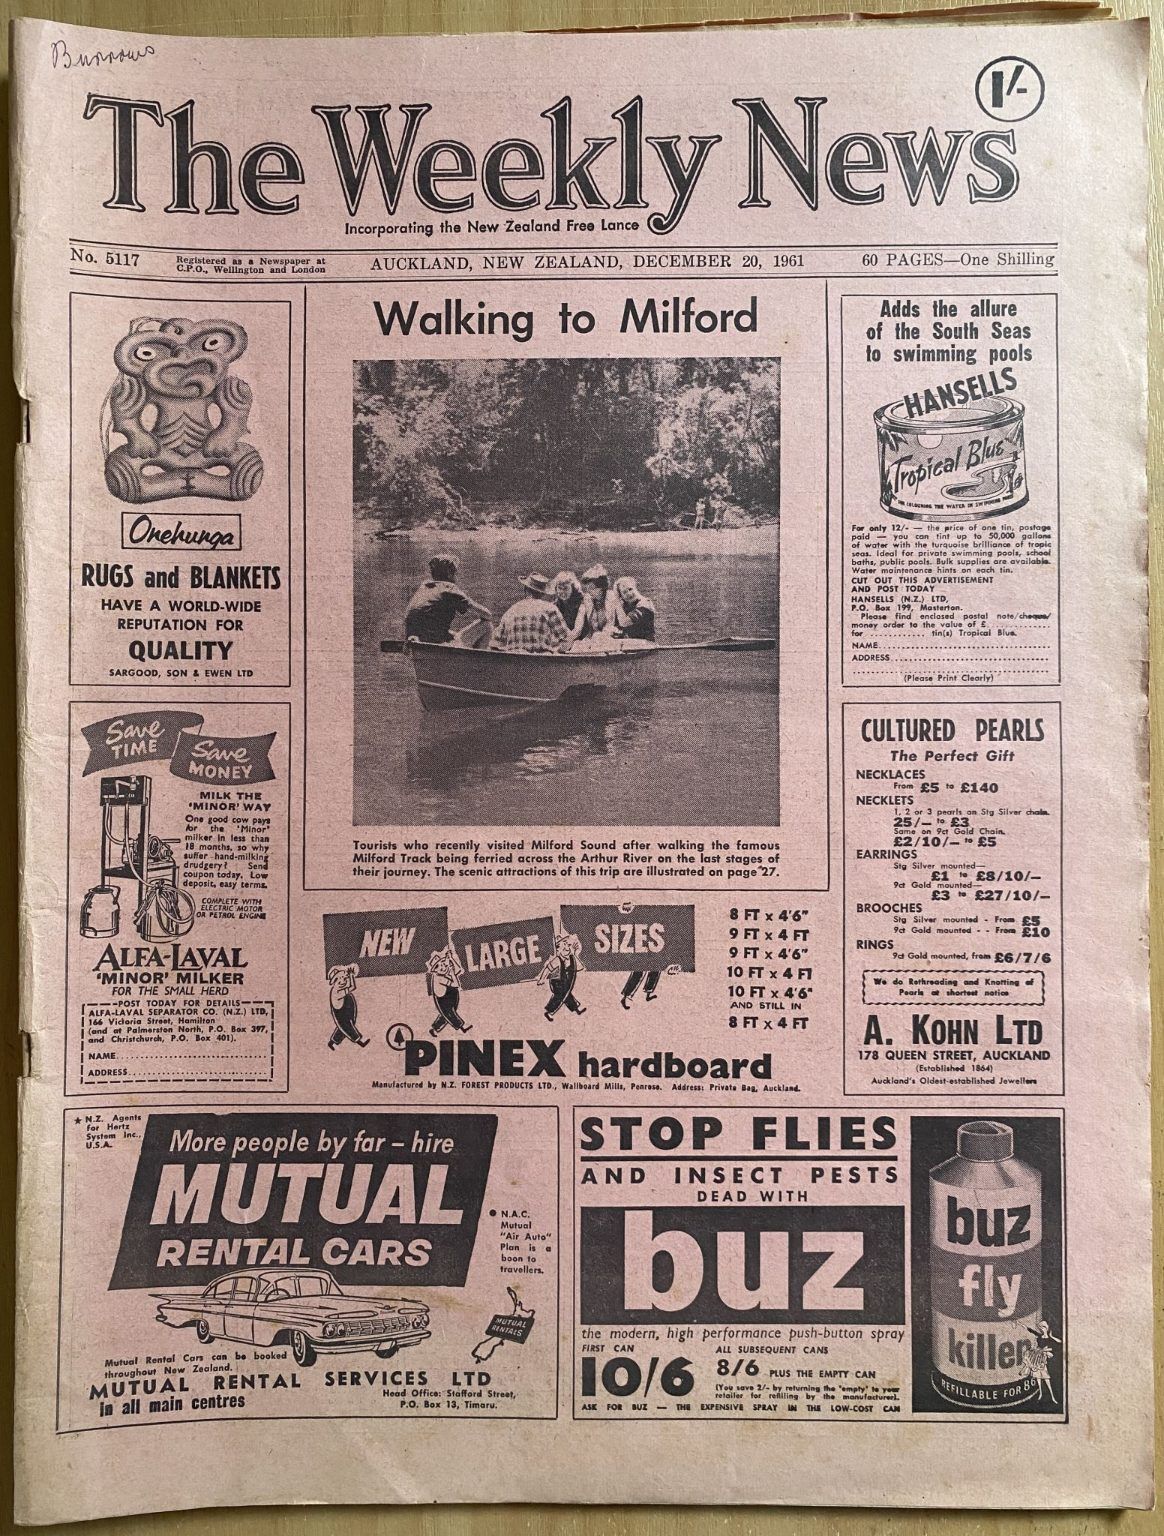 OLD NEWSPAPER: The Weekly News, No. 5117, 20 December 1961